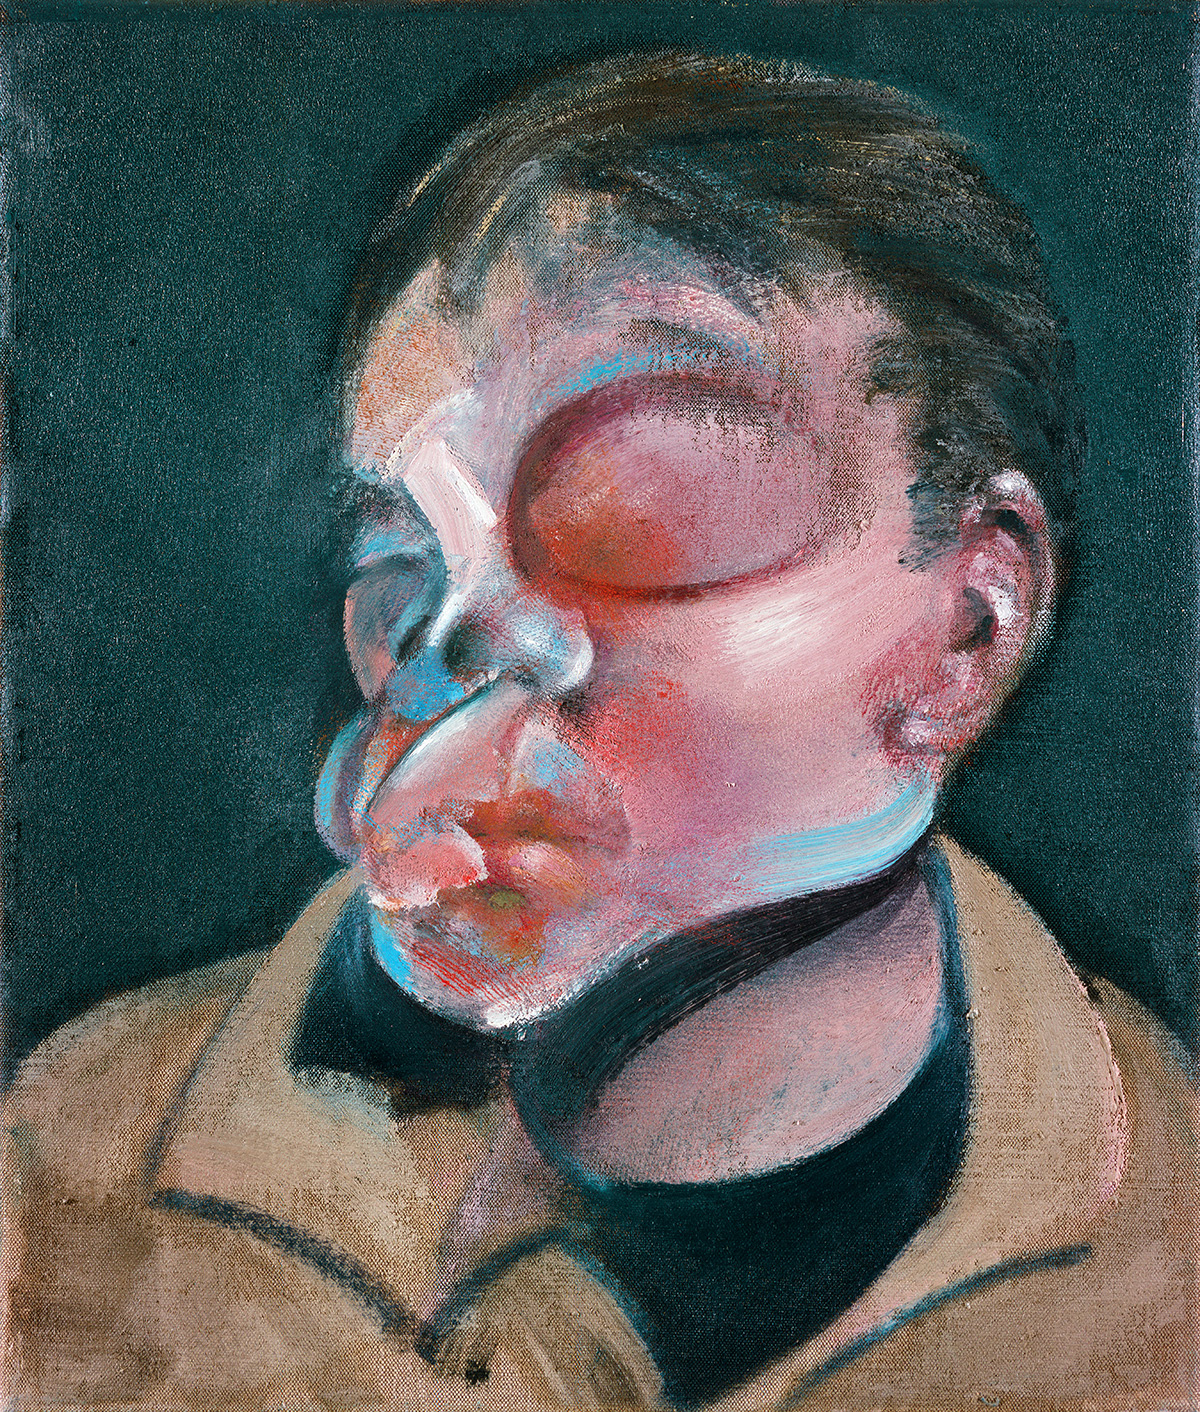 Francis Bacon, CR no 72-02. © Self- Portrait with Injured Eye, 1972. Oil on canvas.  